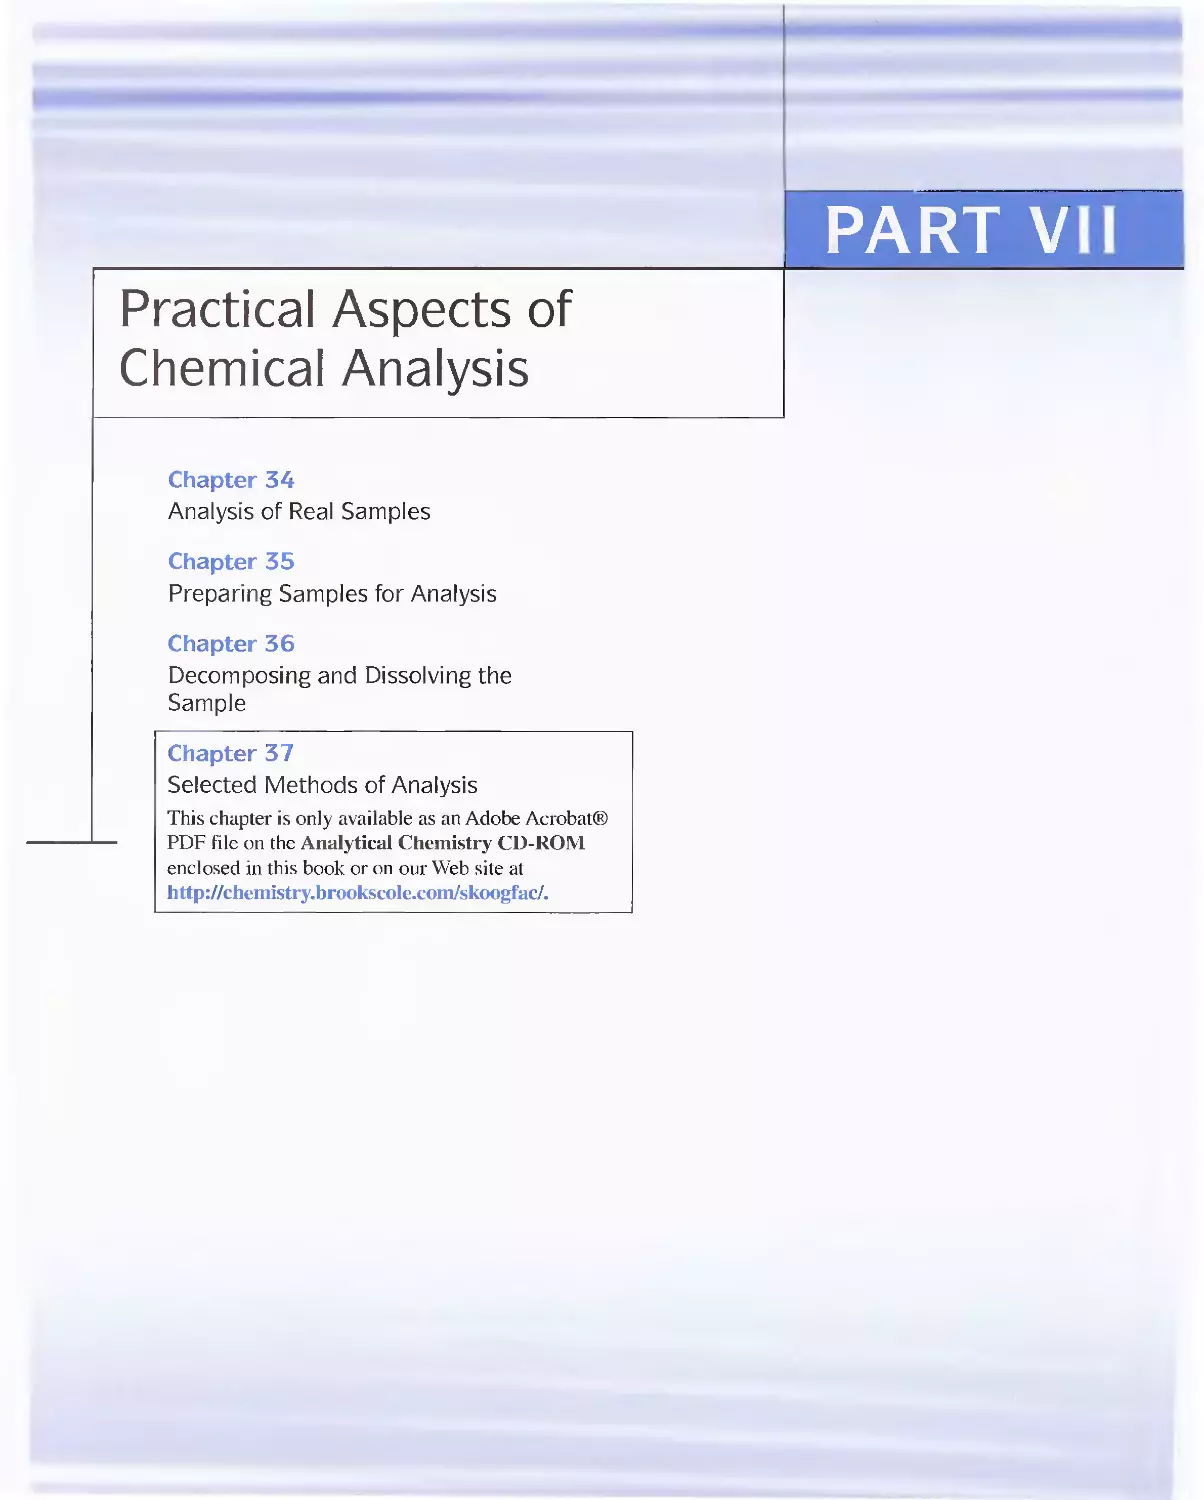 Part 7 - Practical Aspects of Chemical Analysis